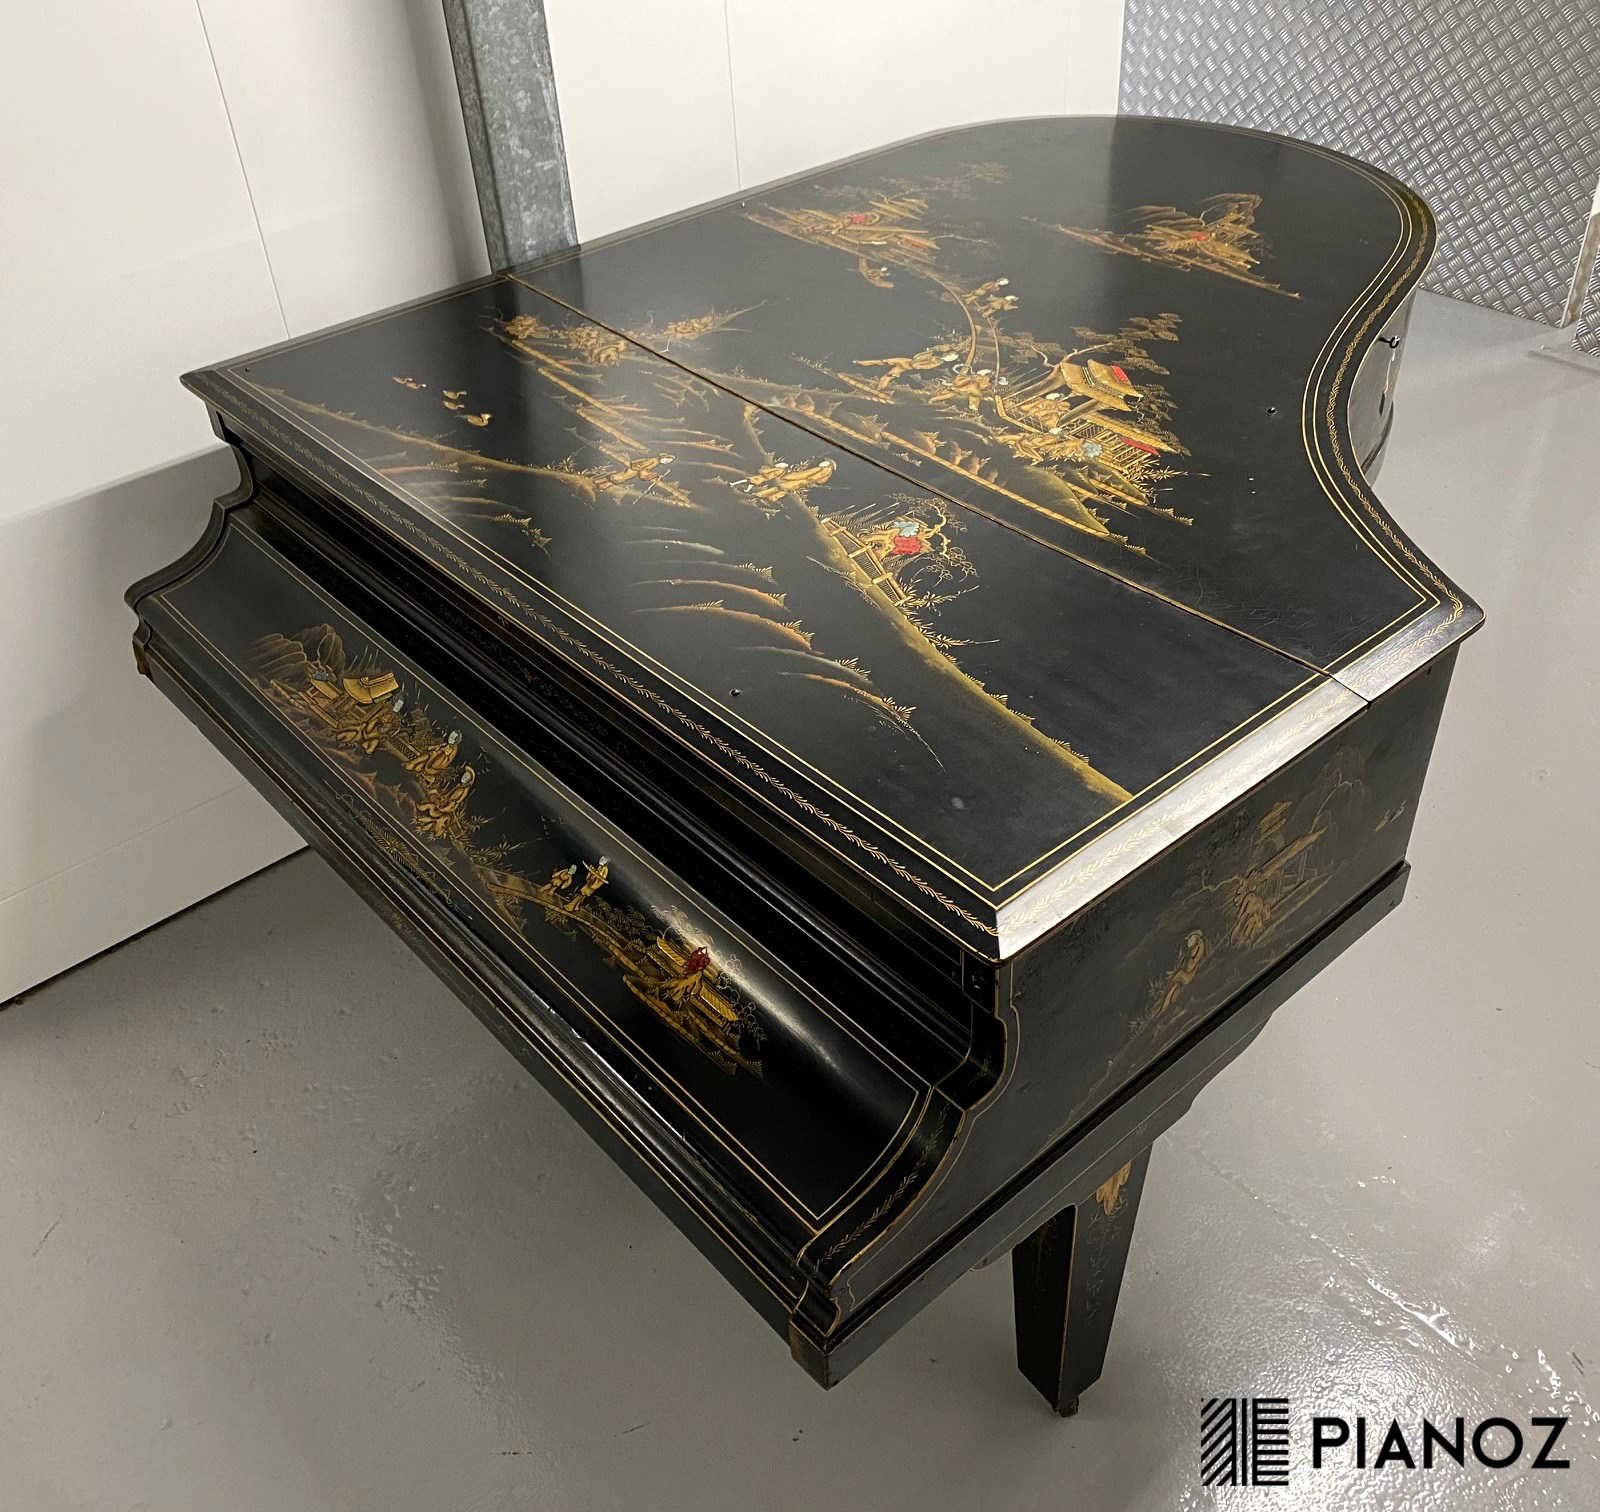 Kaps Chinoiserie Grand Piano piano for sale in UK